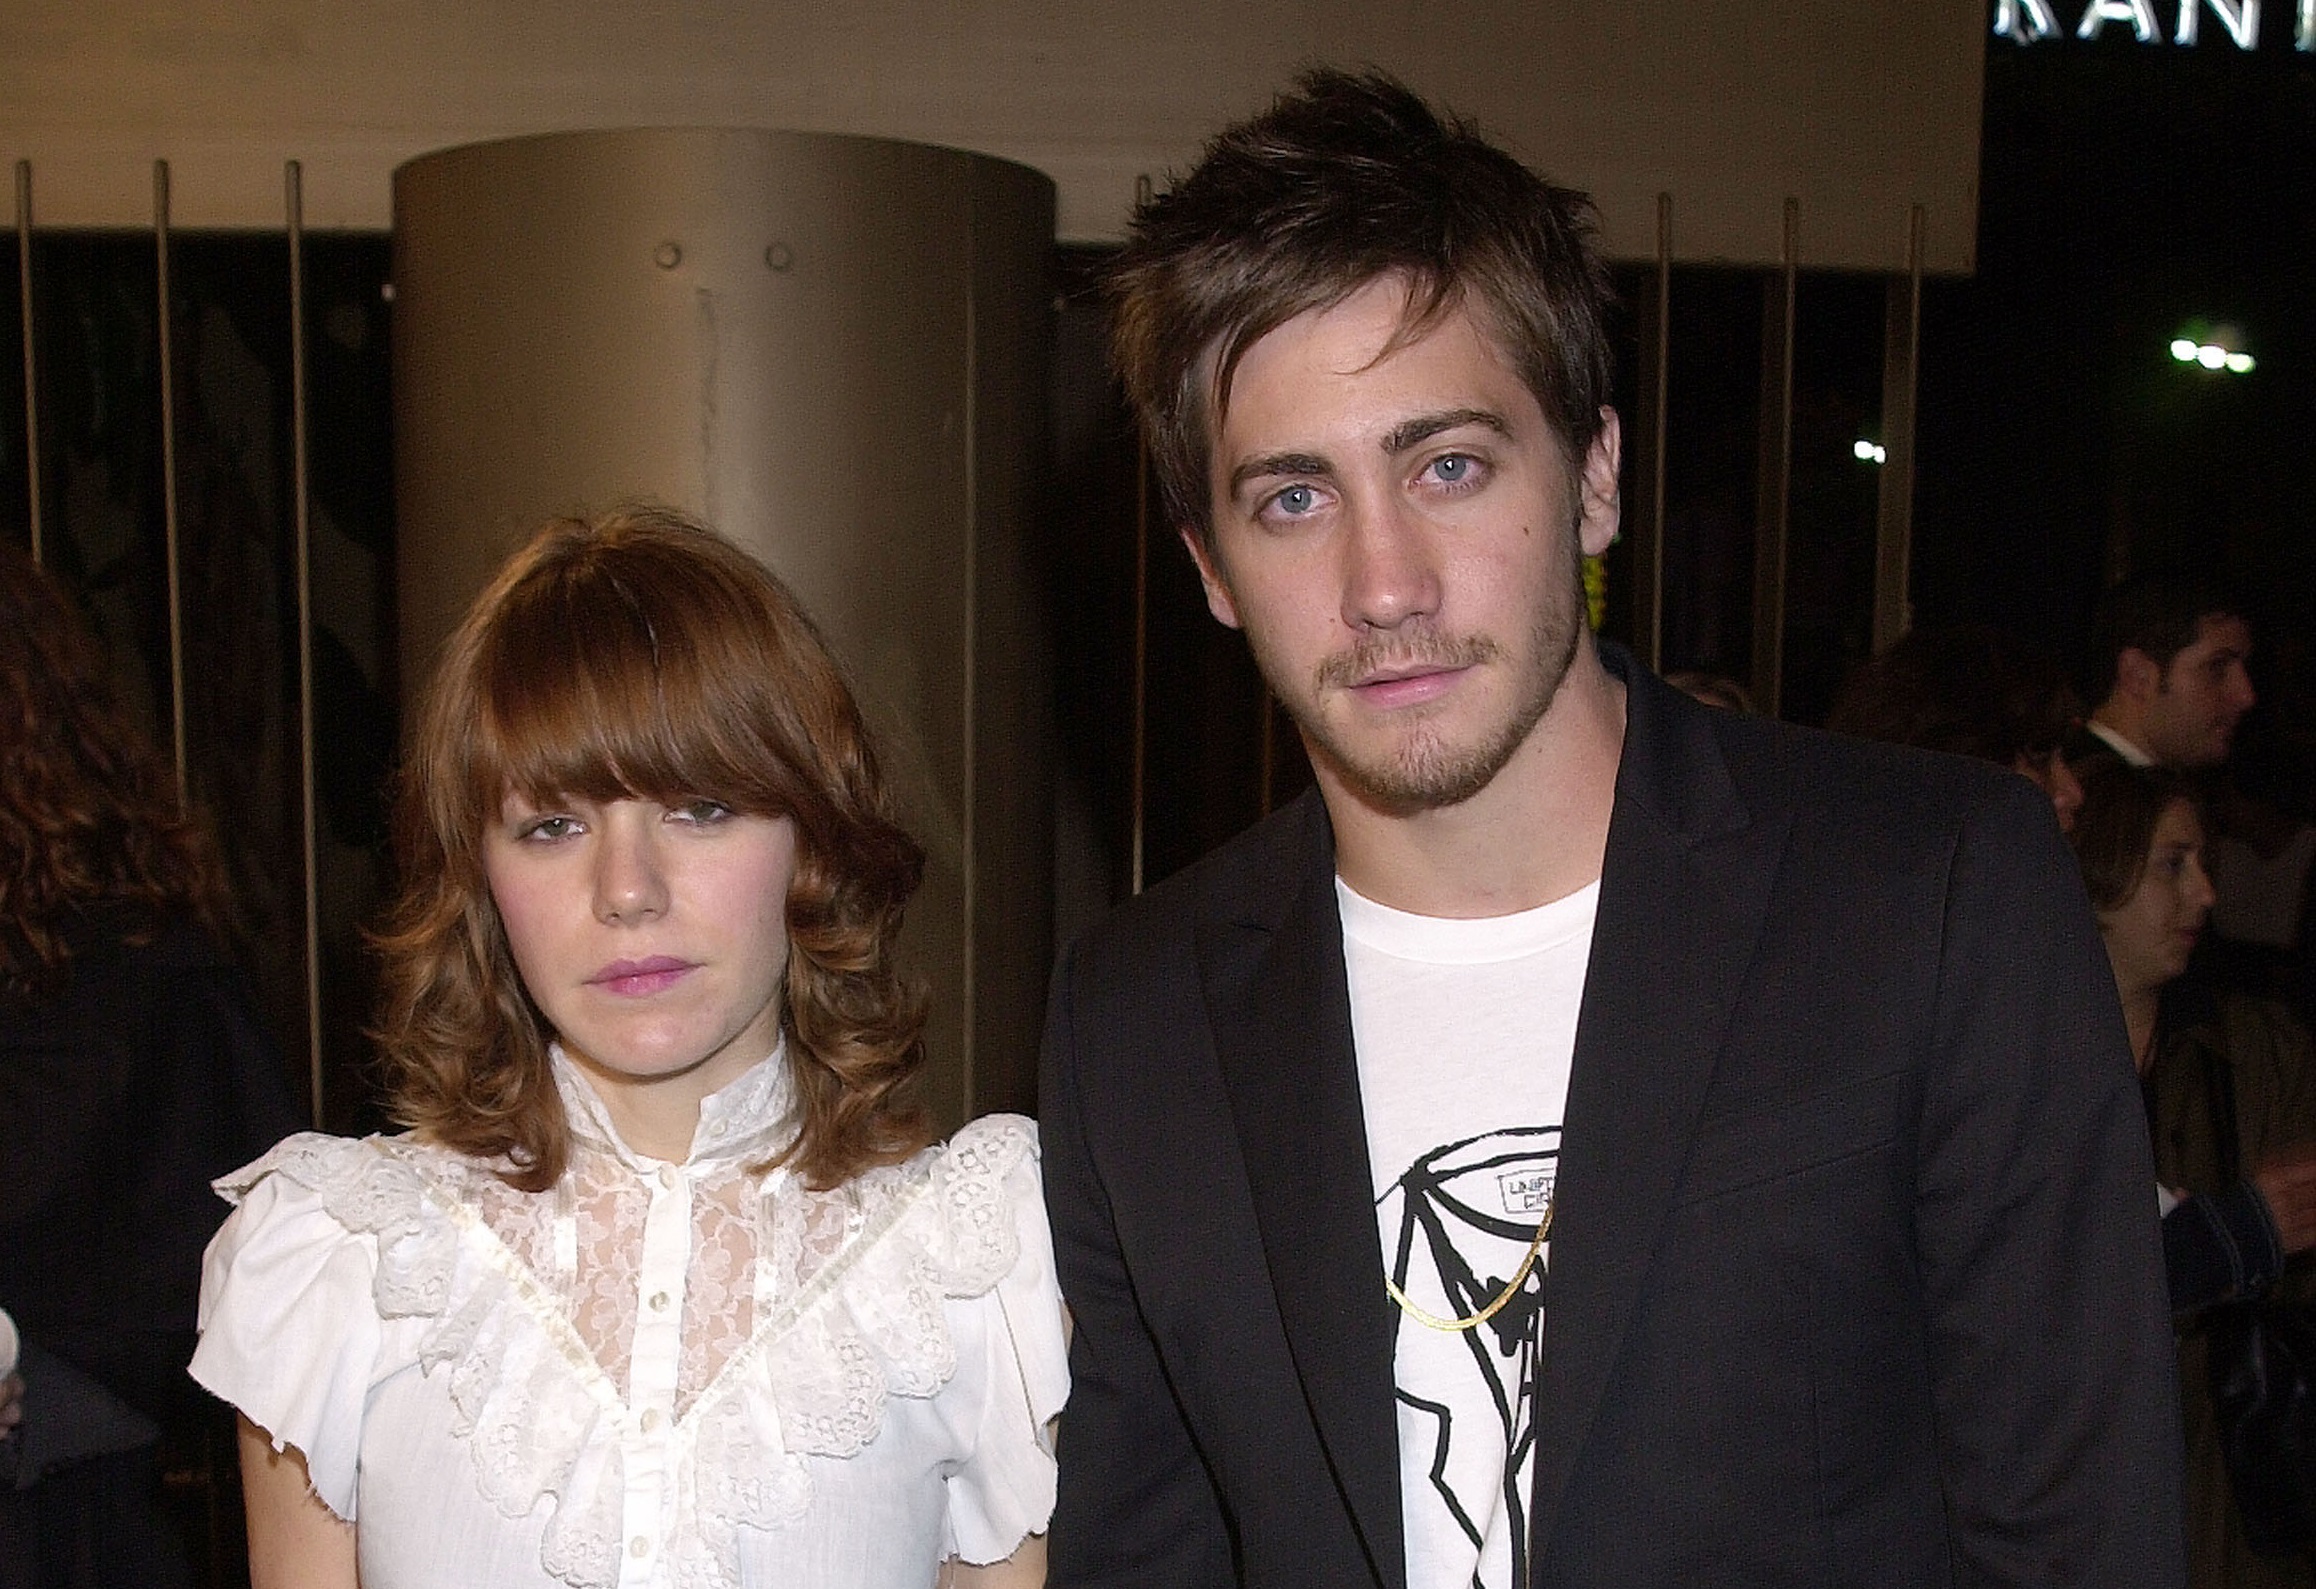 Jenny Lewis and Jake Gyllenhaal at the 'Donnie Darko' premiere on October 22, 2001